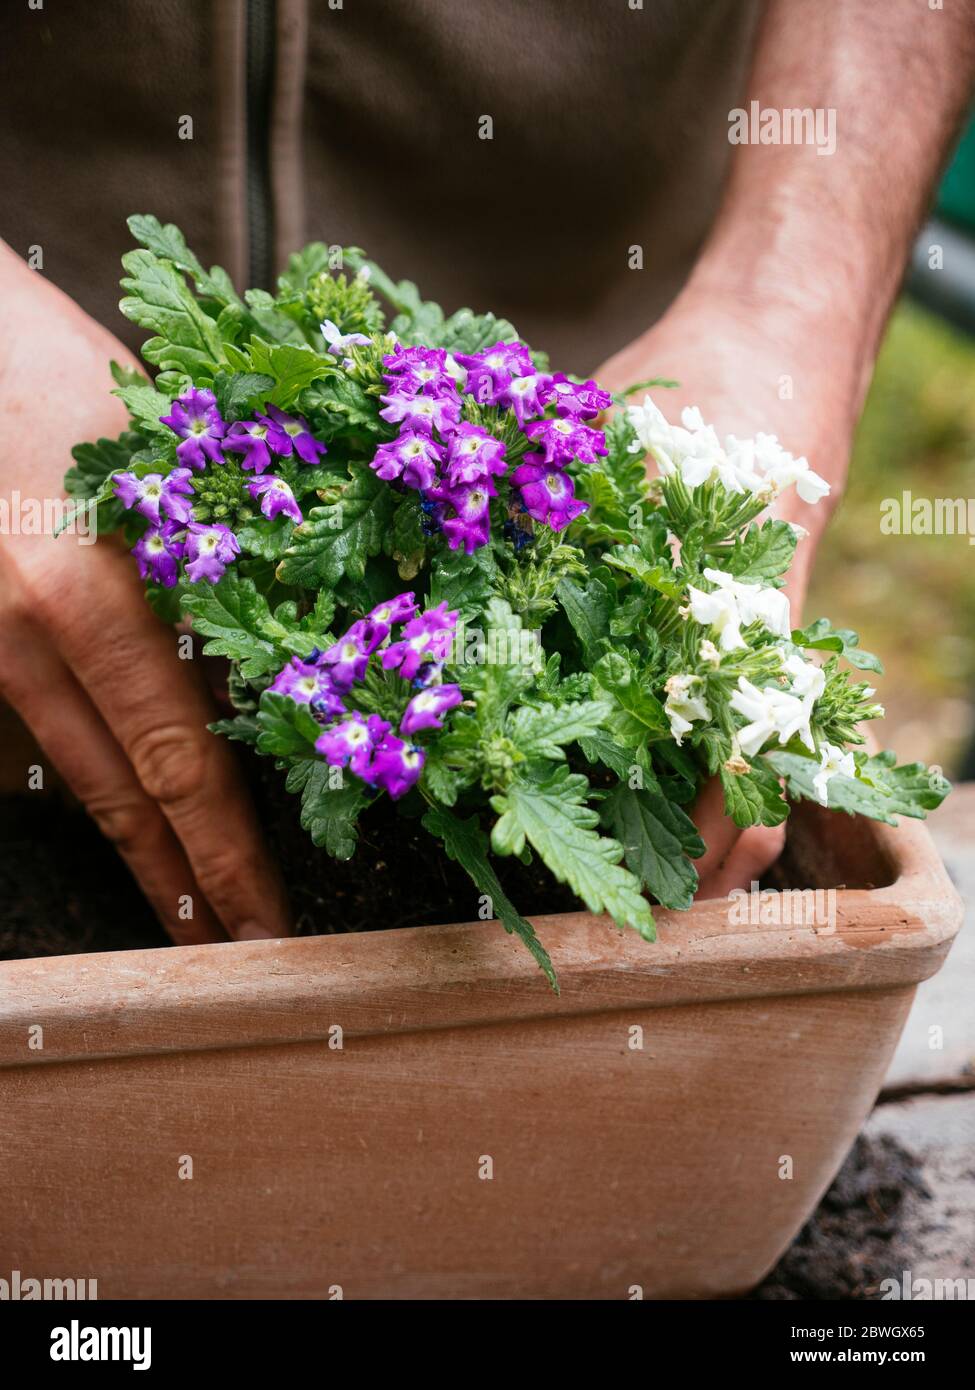 Gardener planting trailing verbena flowers in a terracotta container. Stock Photo